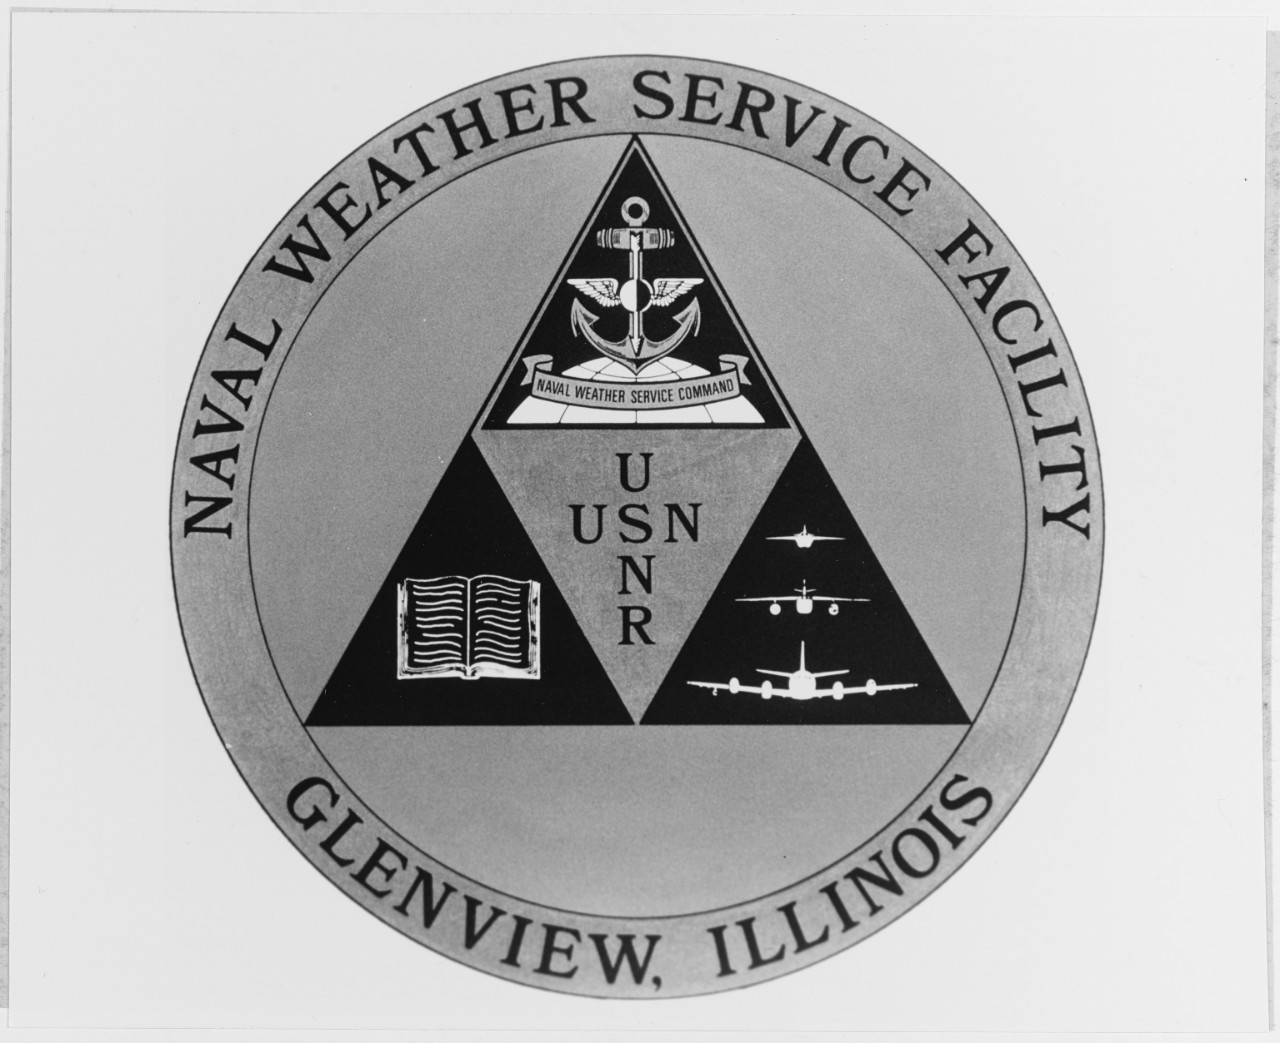 Insignia:  Naval Weather Service Facility, Glenview.